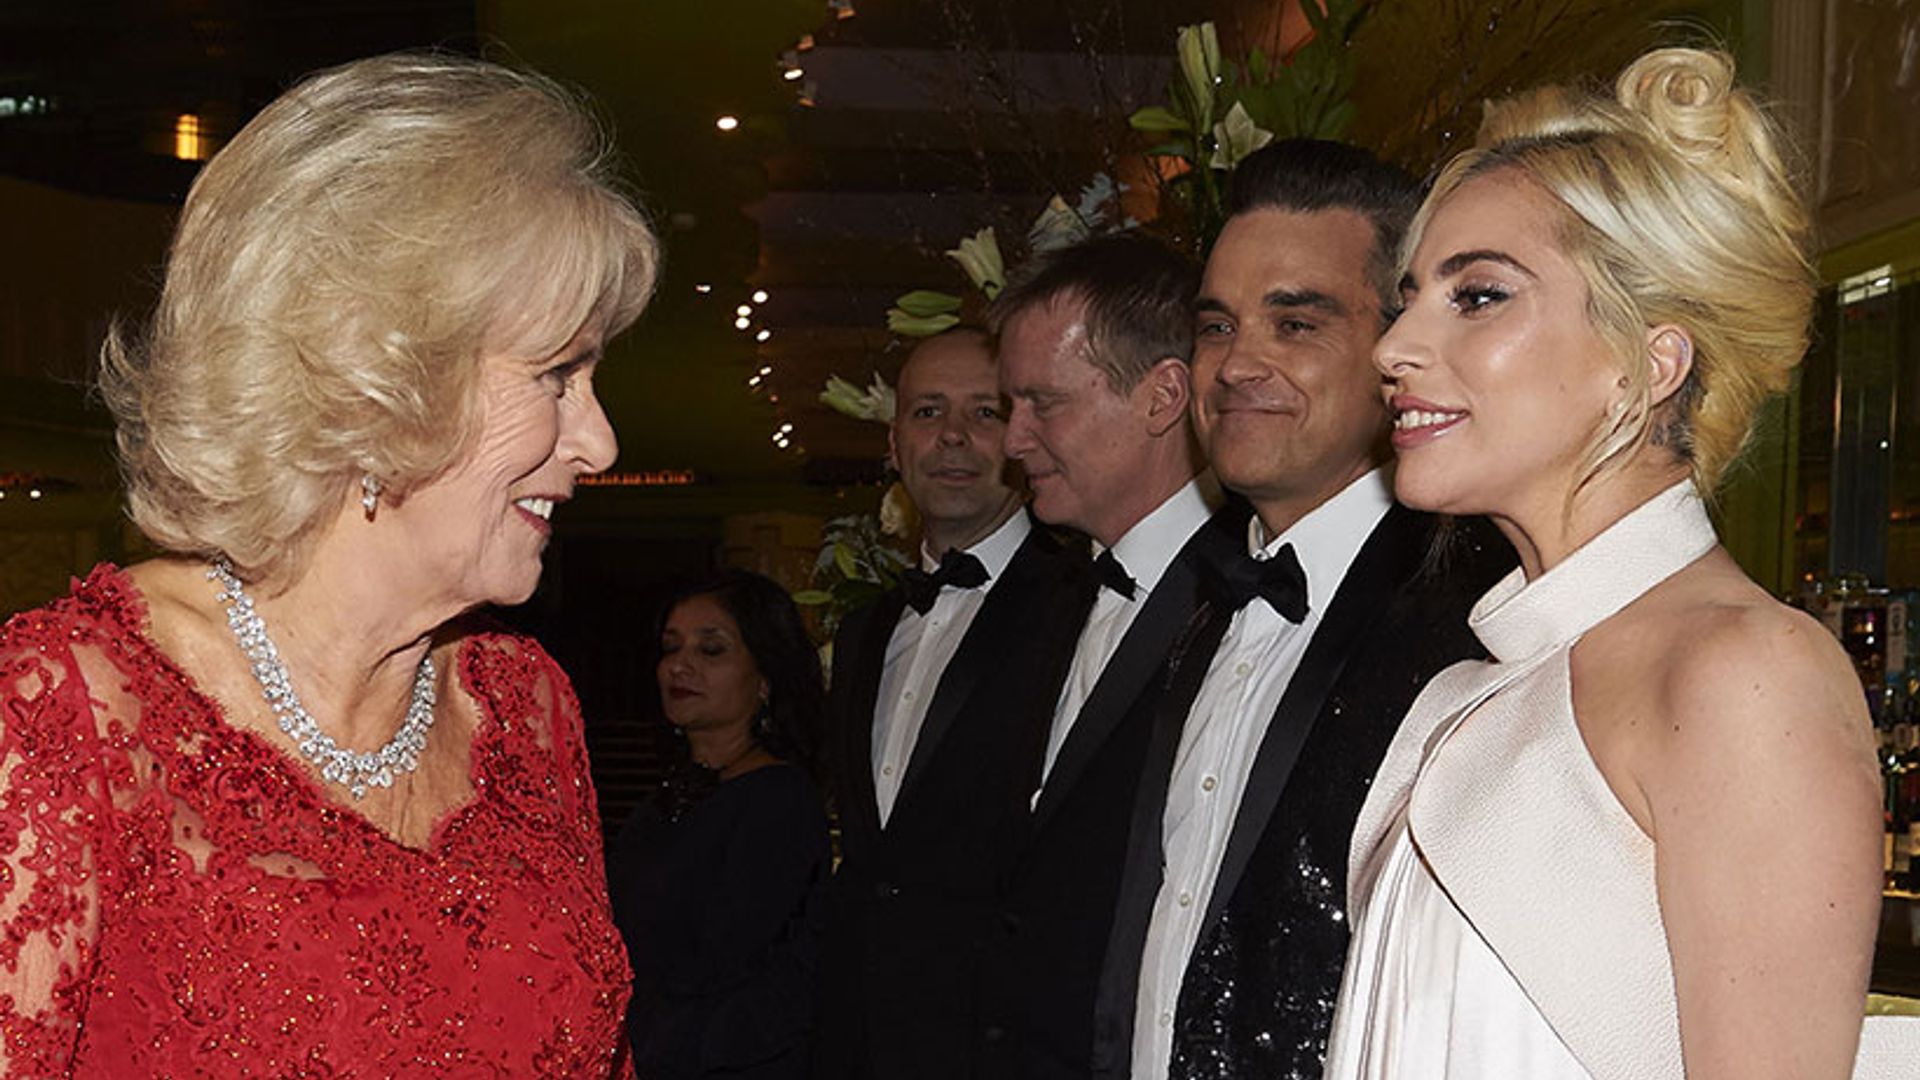 See what the Duchess of Cornwall told Lady Gaga they had in common!